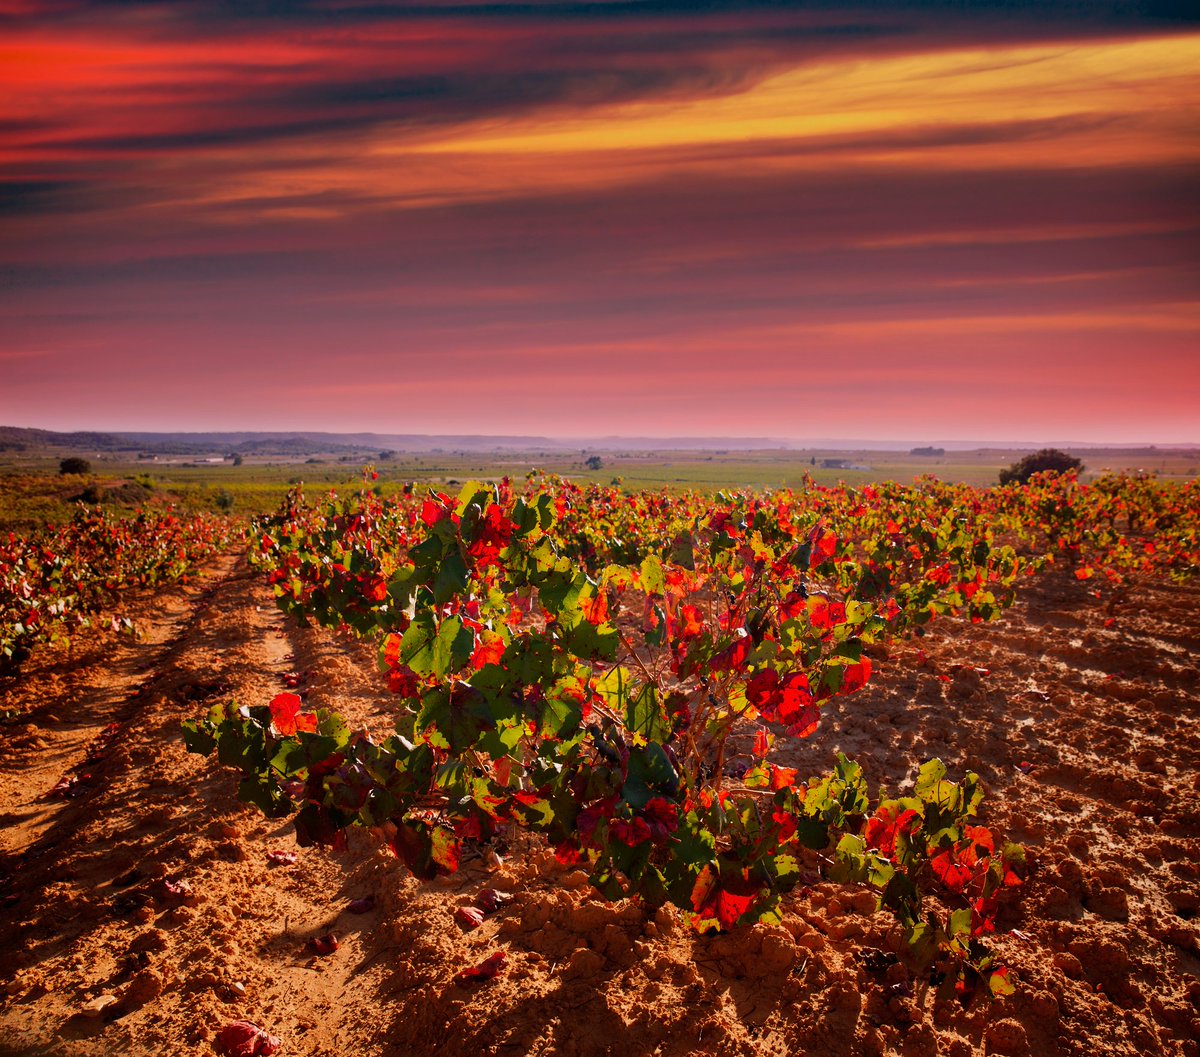 Looking for the perfect autumn break? Check out @winetouring in Spain on @hero_leander bit.ly/2cEOfg7 #travel #winetourismspain